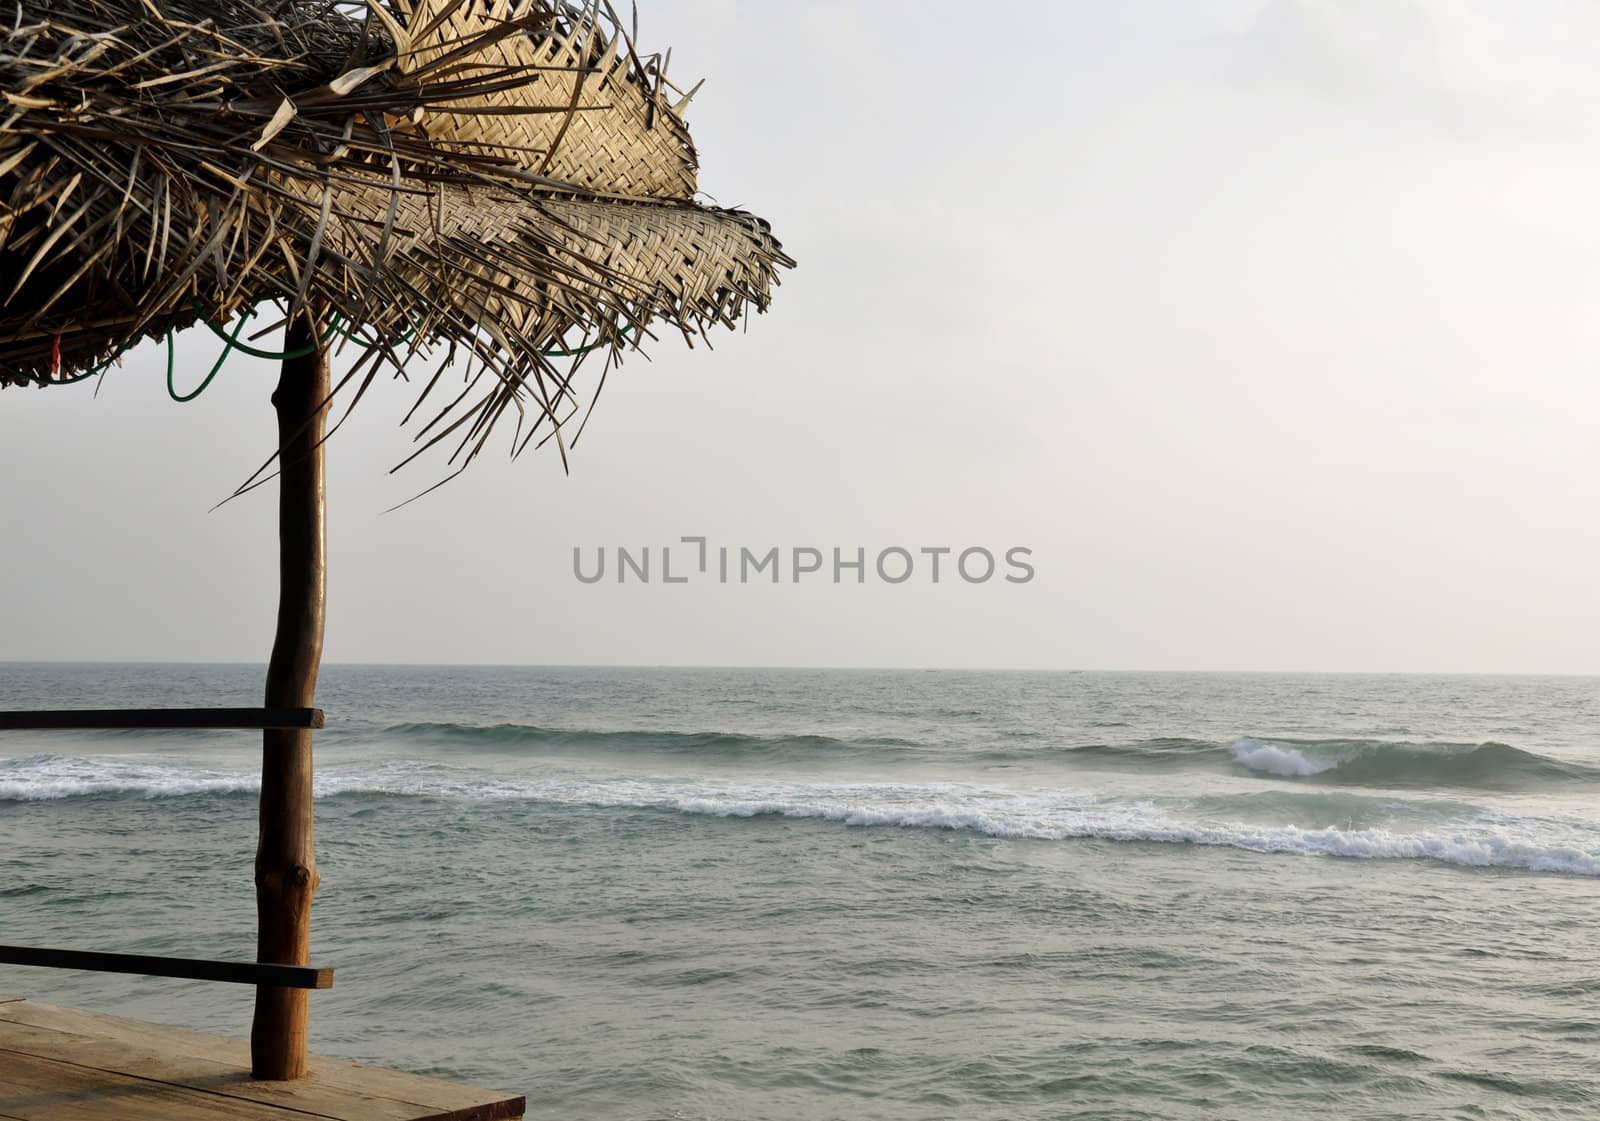 The view of the ocean from a cafe in Sri Lanka by kdreams02